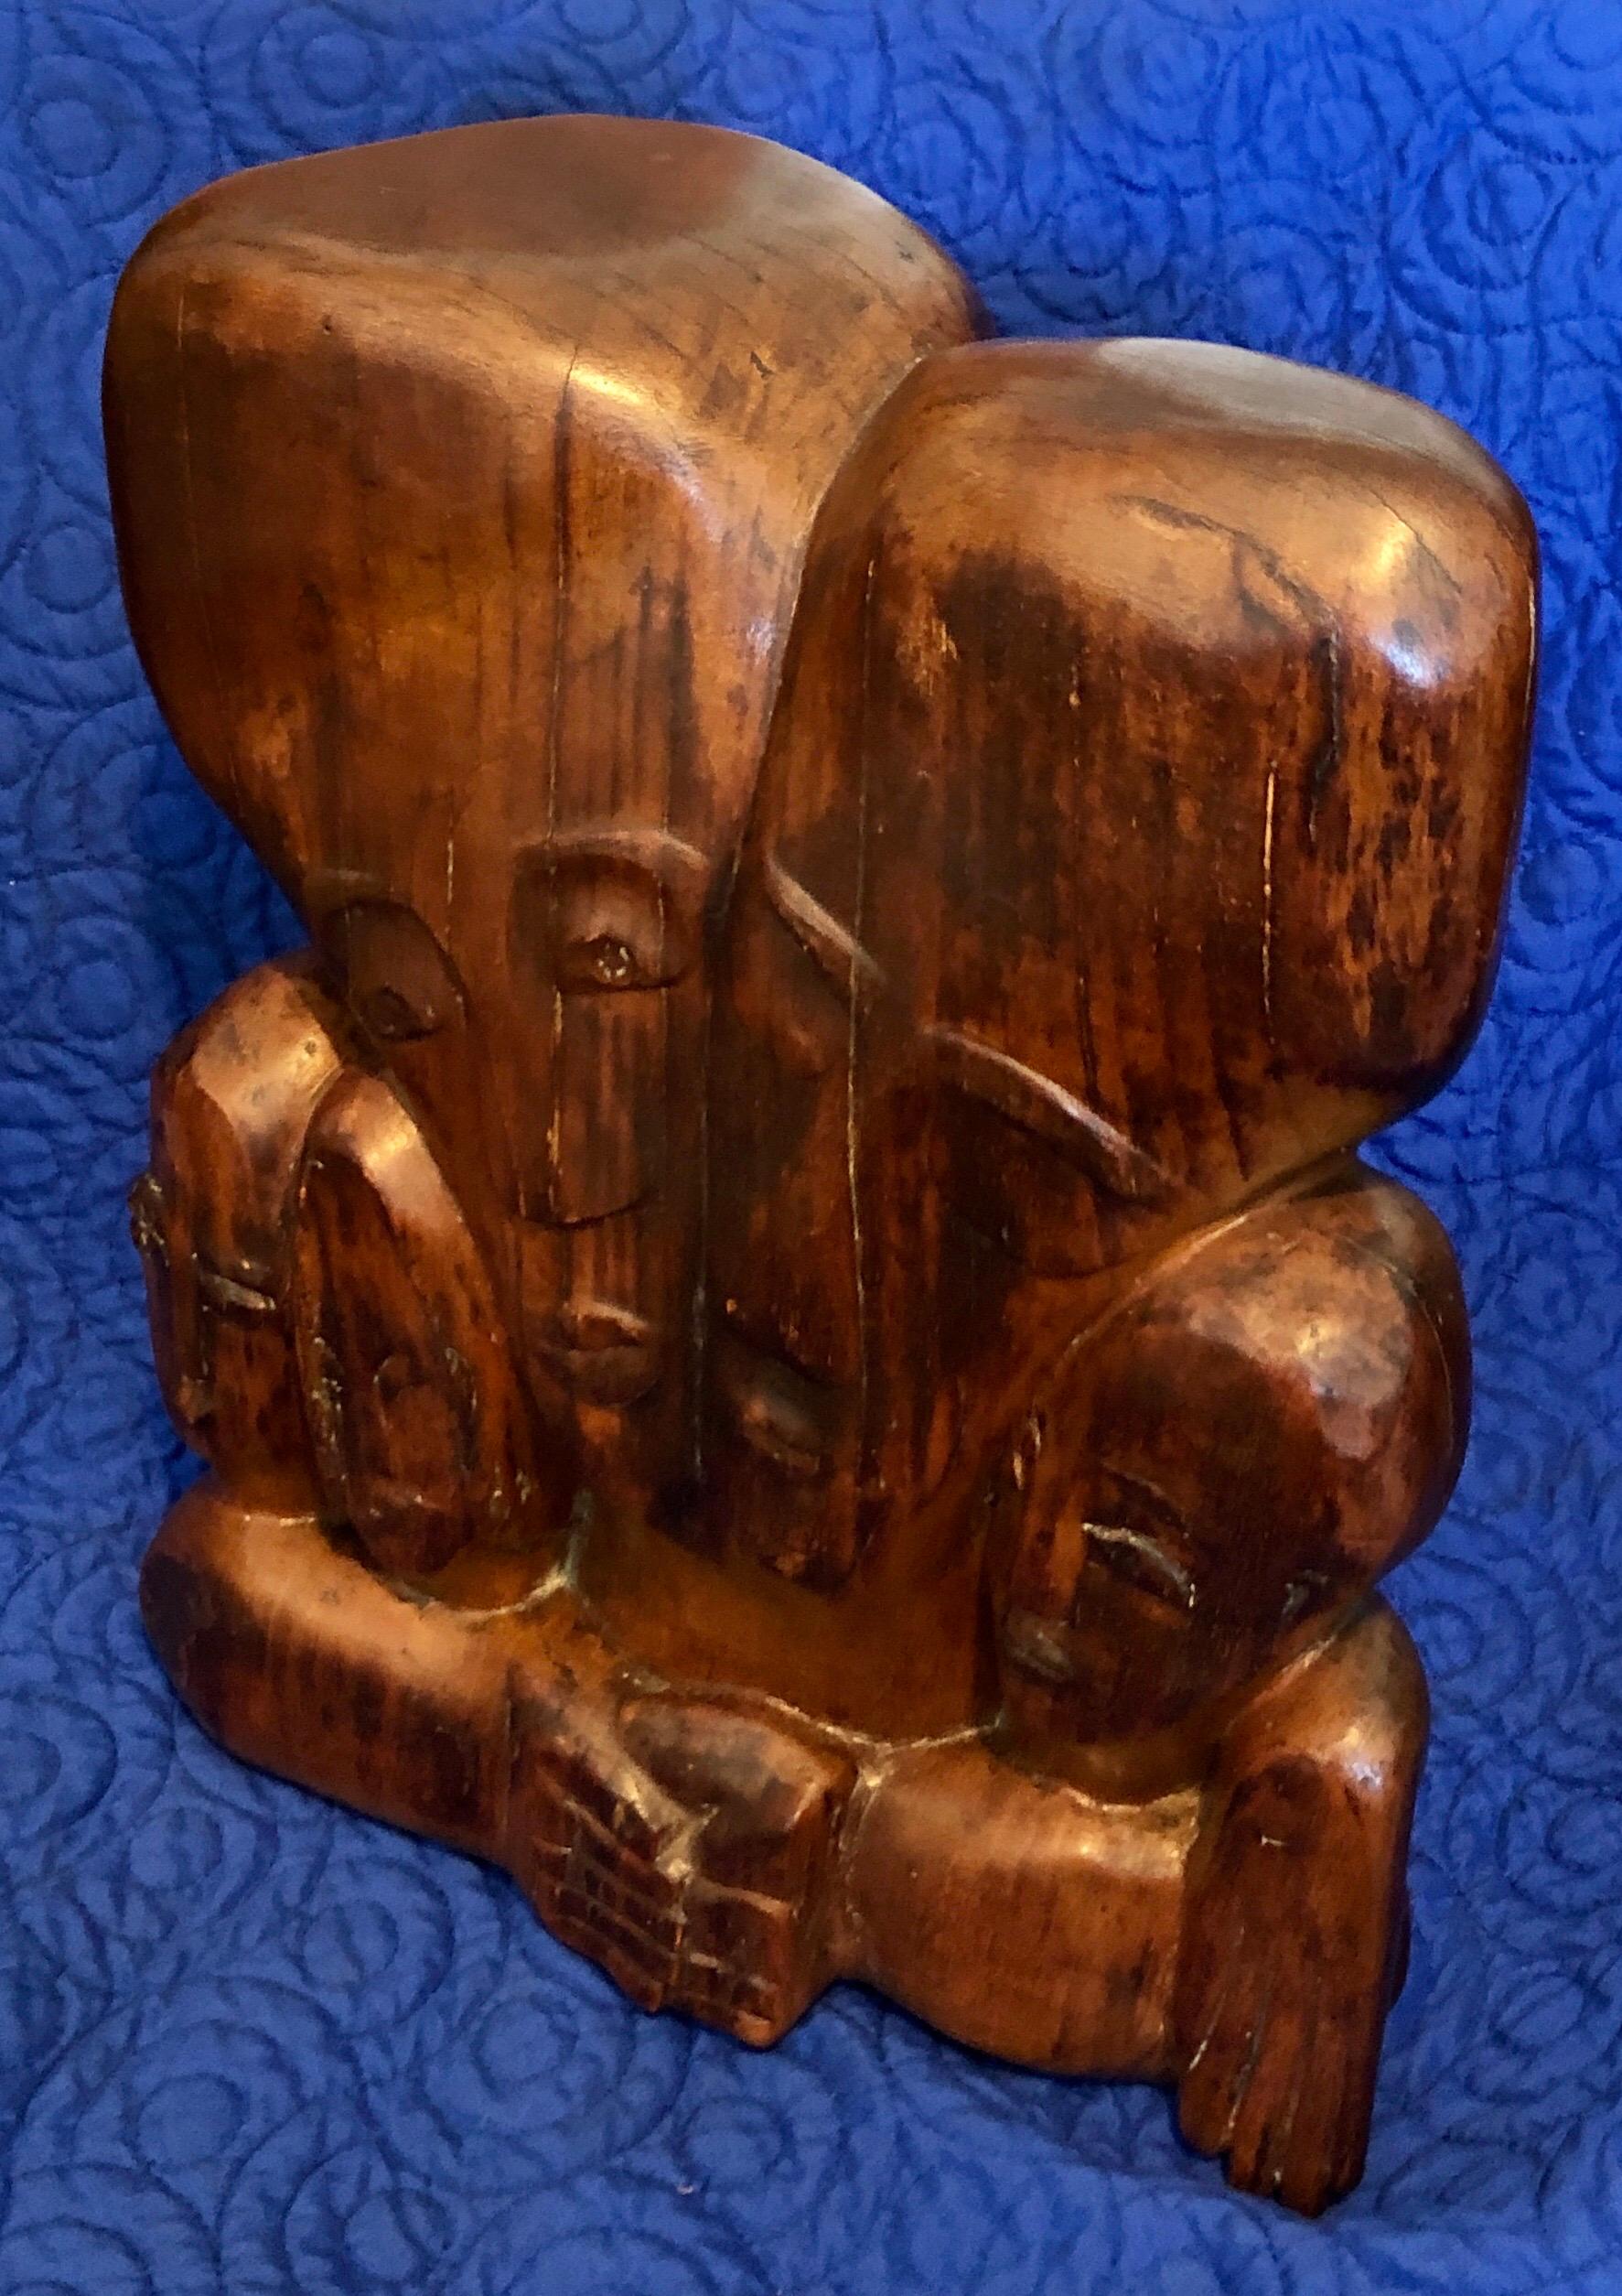 Miriam Sommerburg (American female artist, born Germany, Hamburg, 1900–1980 New York)
Modernist Wood Carved Sculpture, Carving depicting a family group. 
Before being forced to flee Germany during the outbreak of World War II, Miriam Sommerburg had